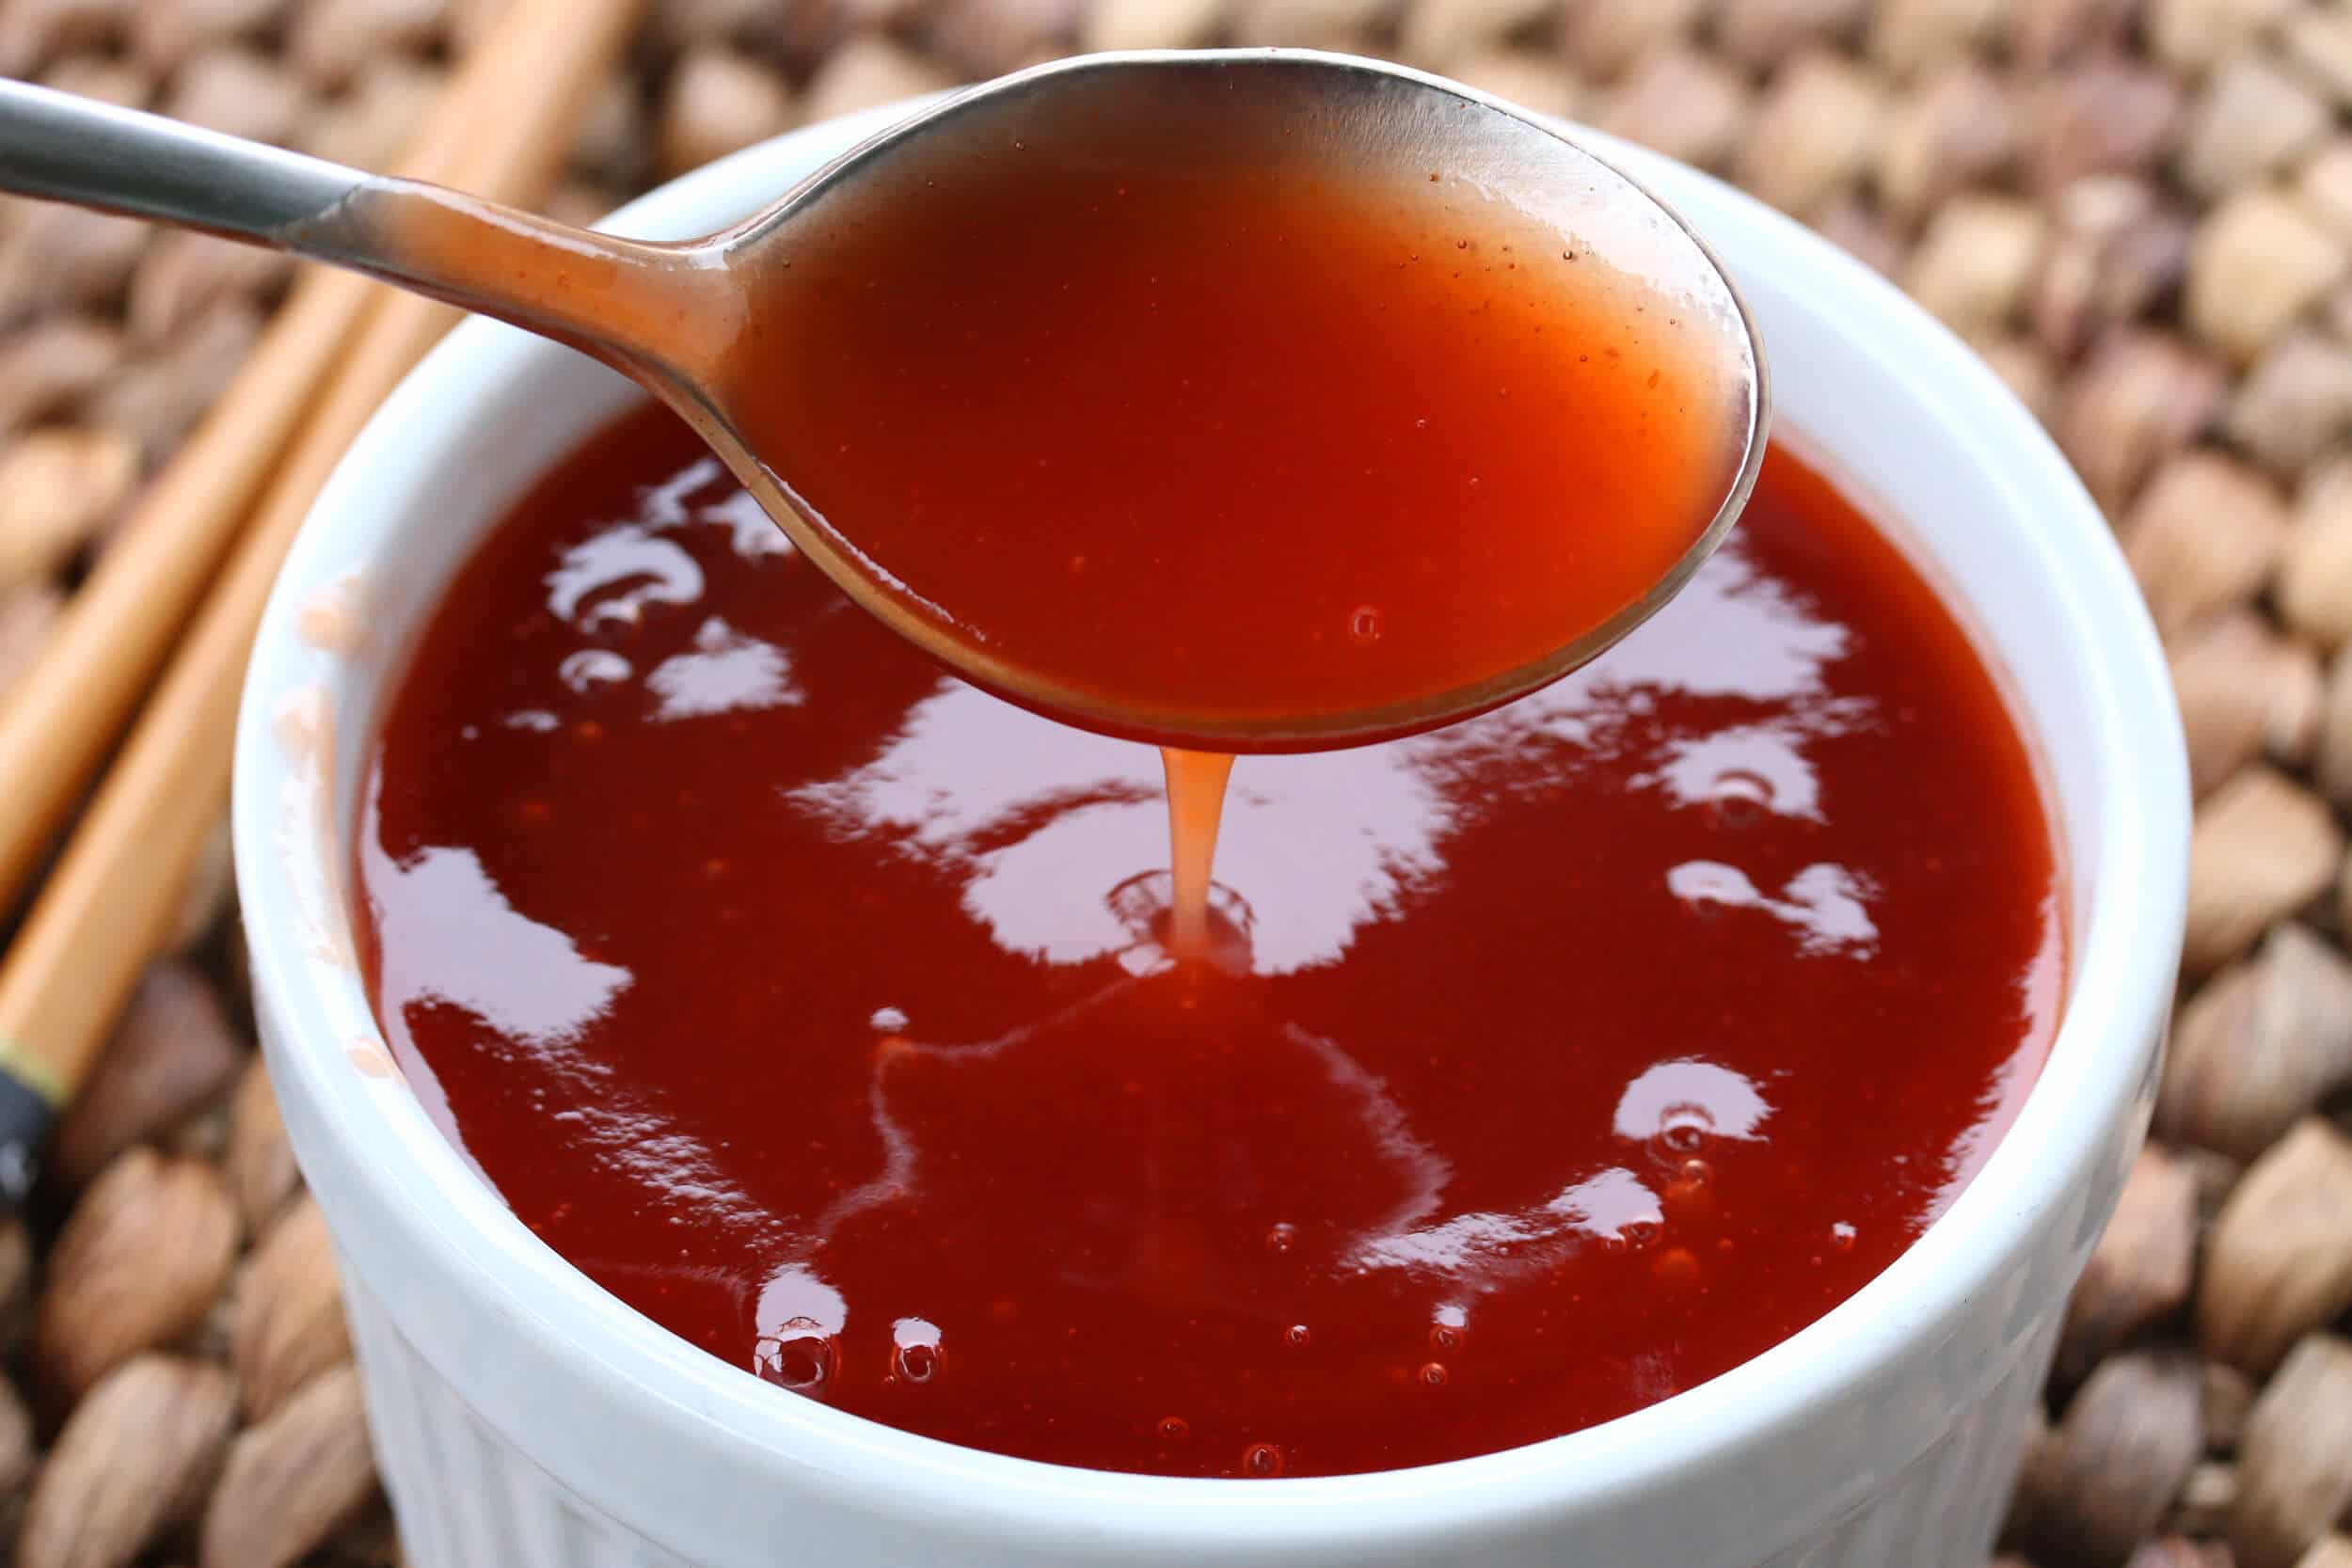 Rate These Sauces and We’ll Reveal Your Dominant Personality Trait Sweet and sour sauce